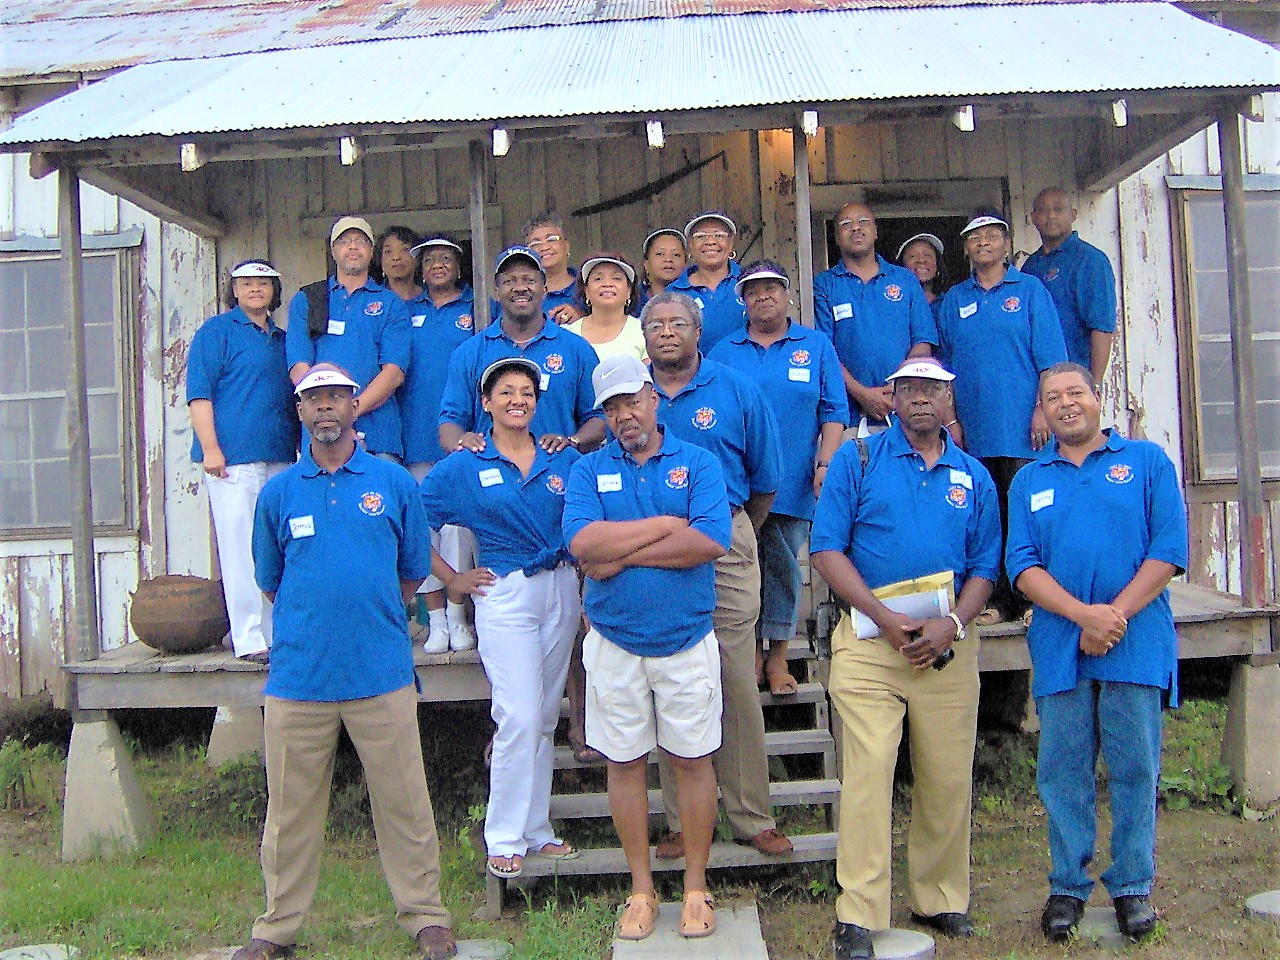 'OUR SMOKIN' 40th REUNION - On steps at TALLAHATCHIE FLATS  During Our TOUR OF GREENWOOD